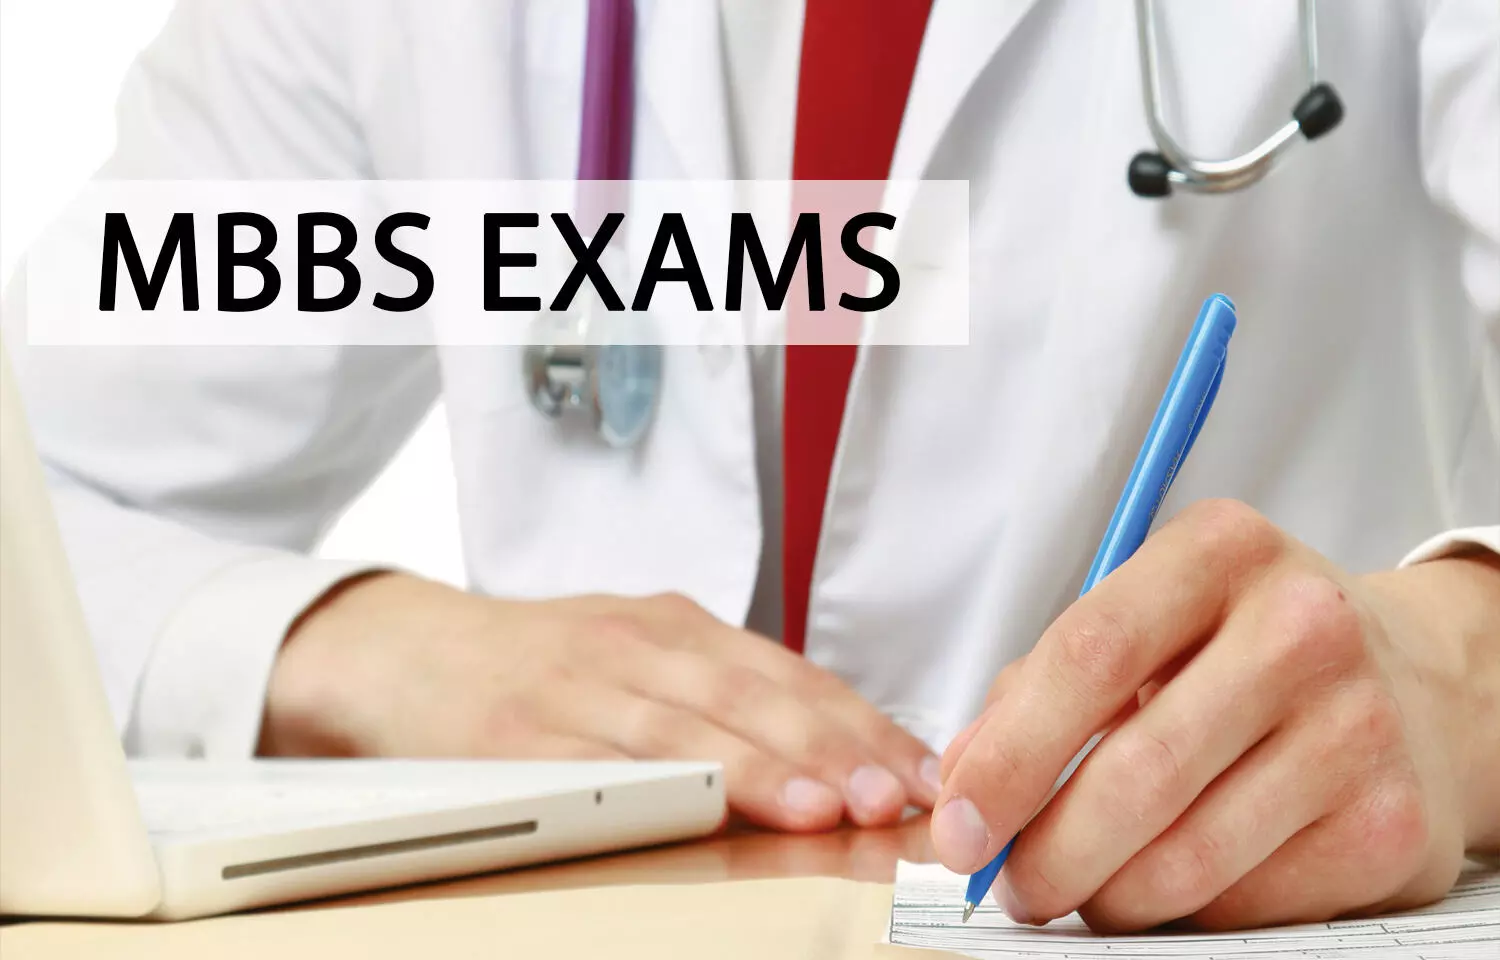 JIPMER releases Theory, Practical Time Table for First MBBS exams, fee details